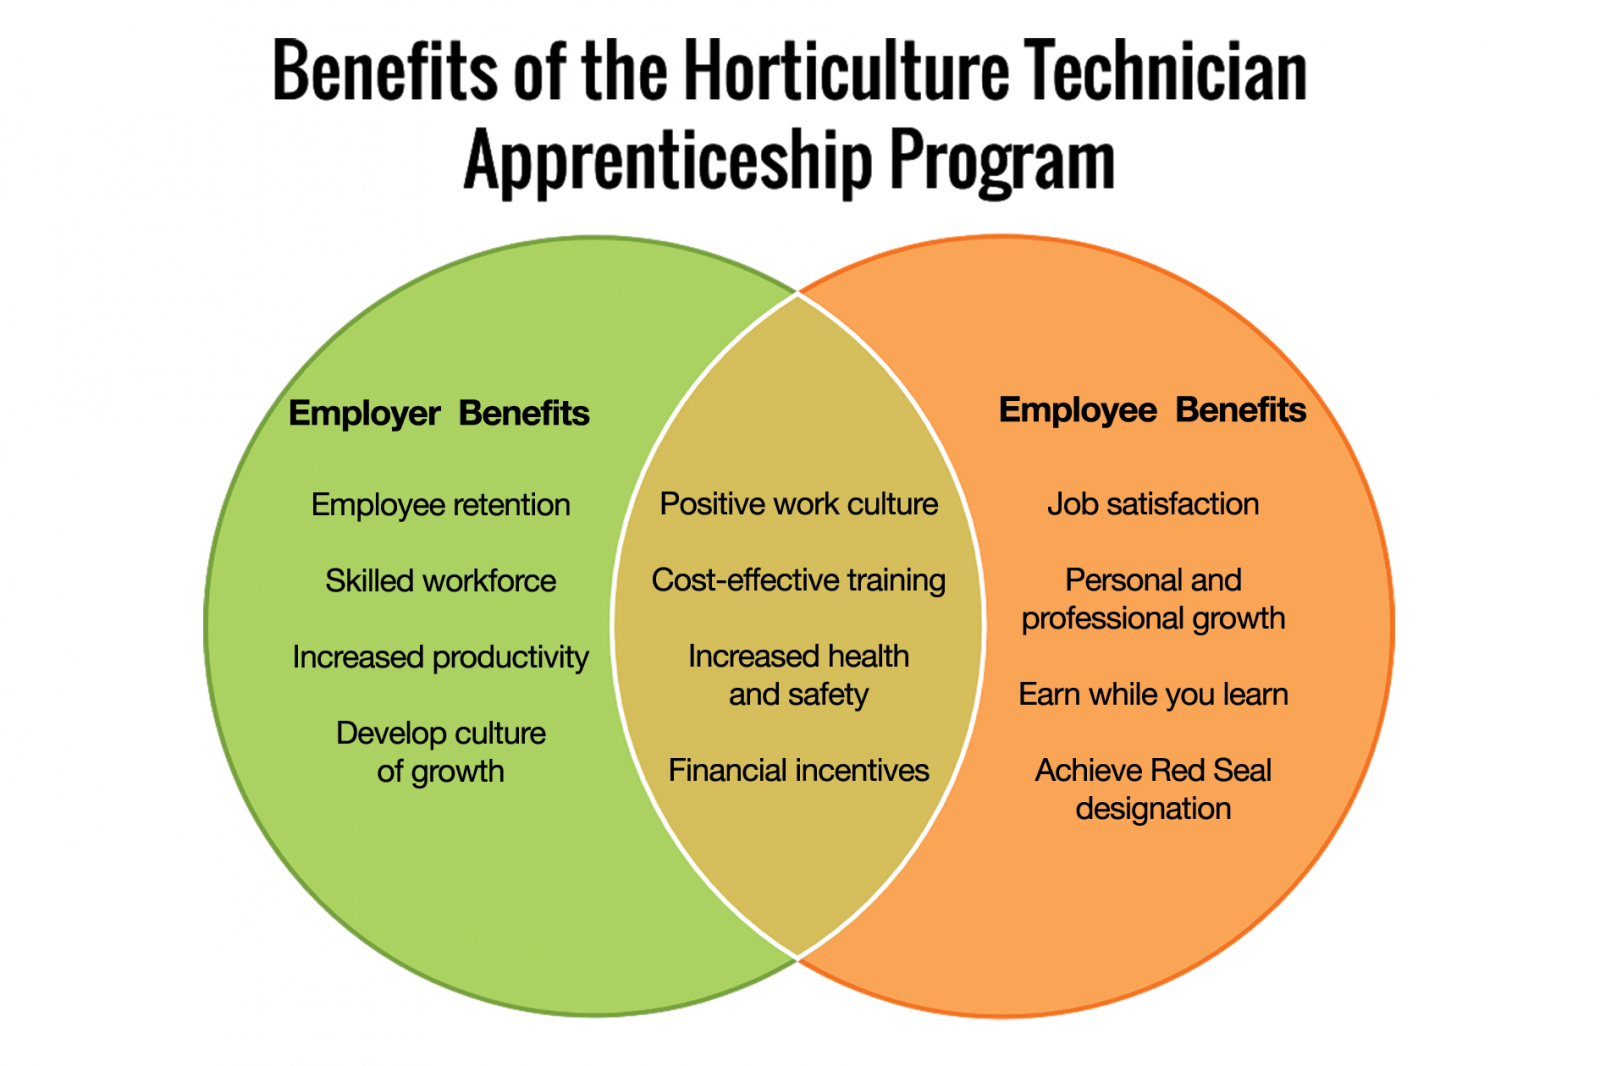 Inspire and invest in your employees through Apprenticeship